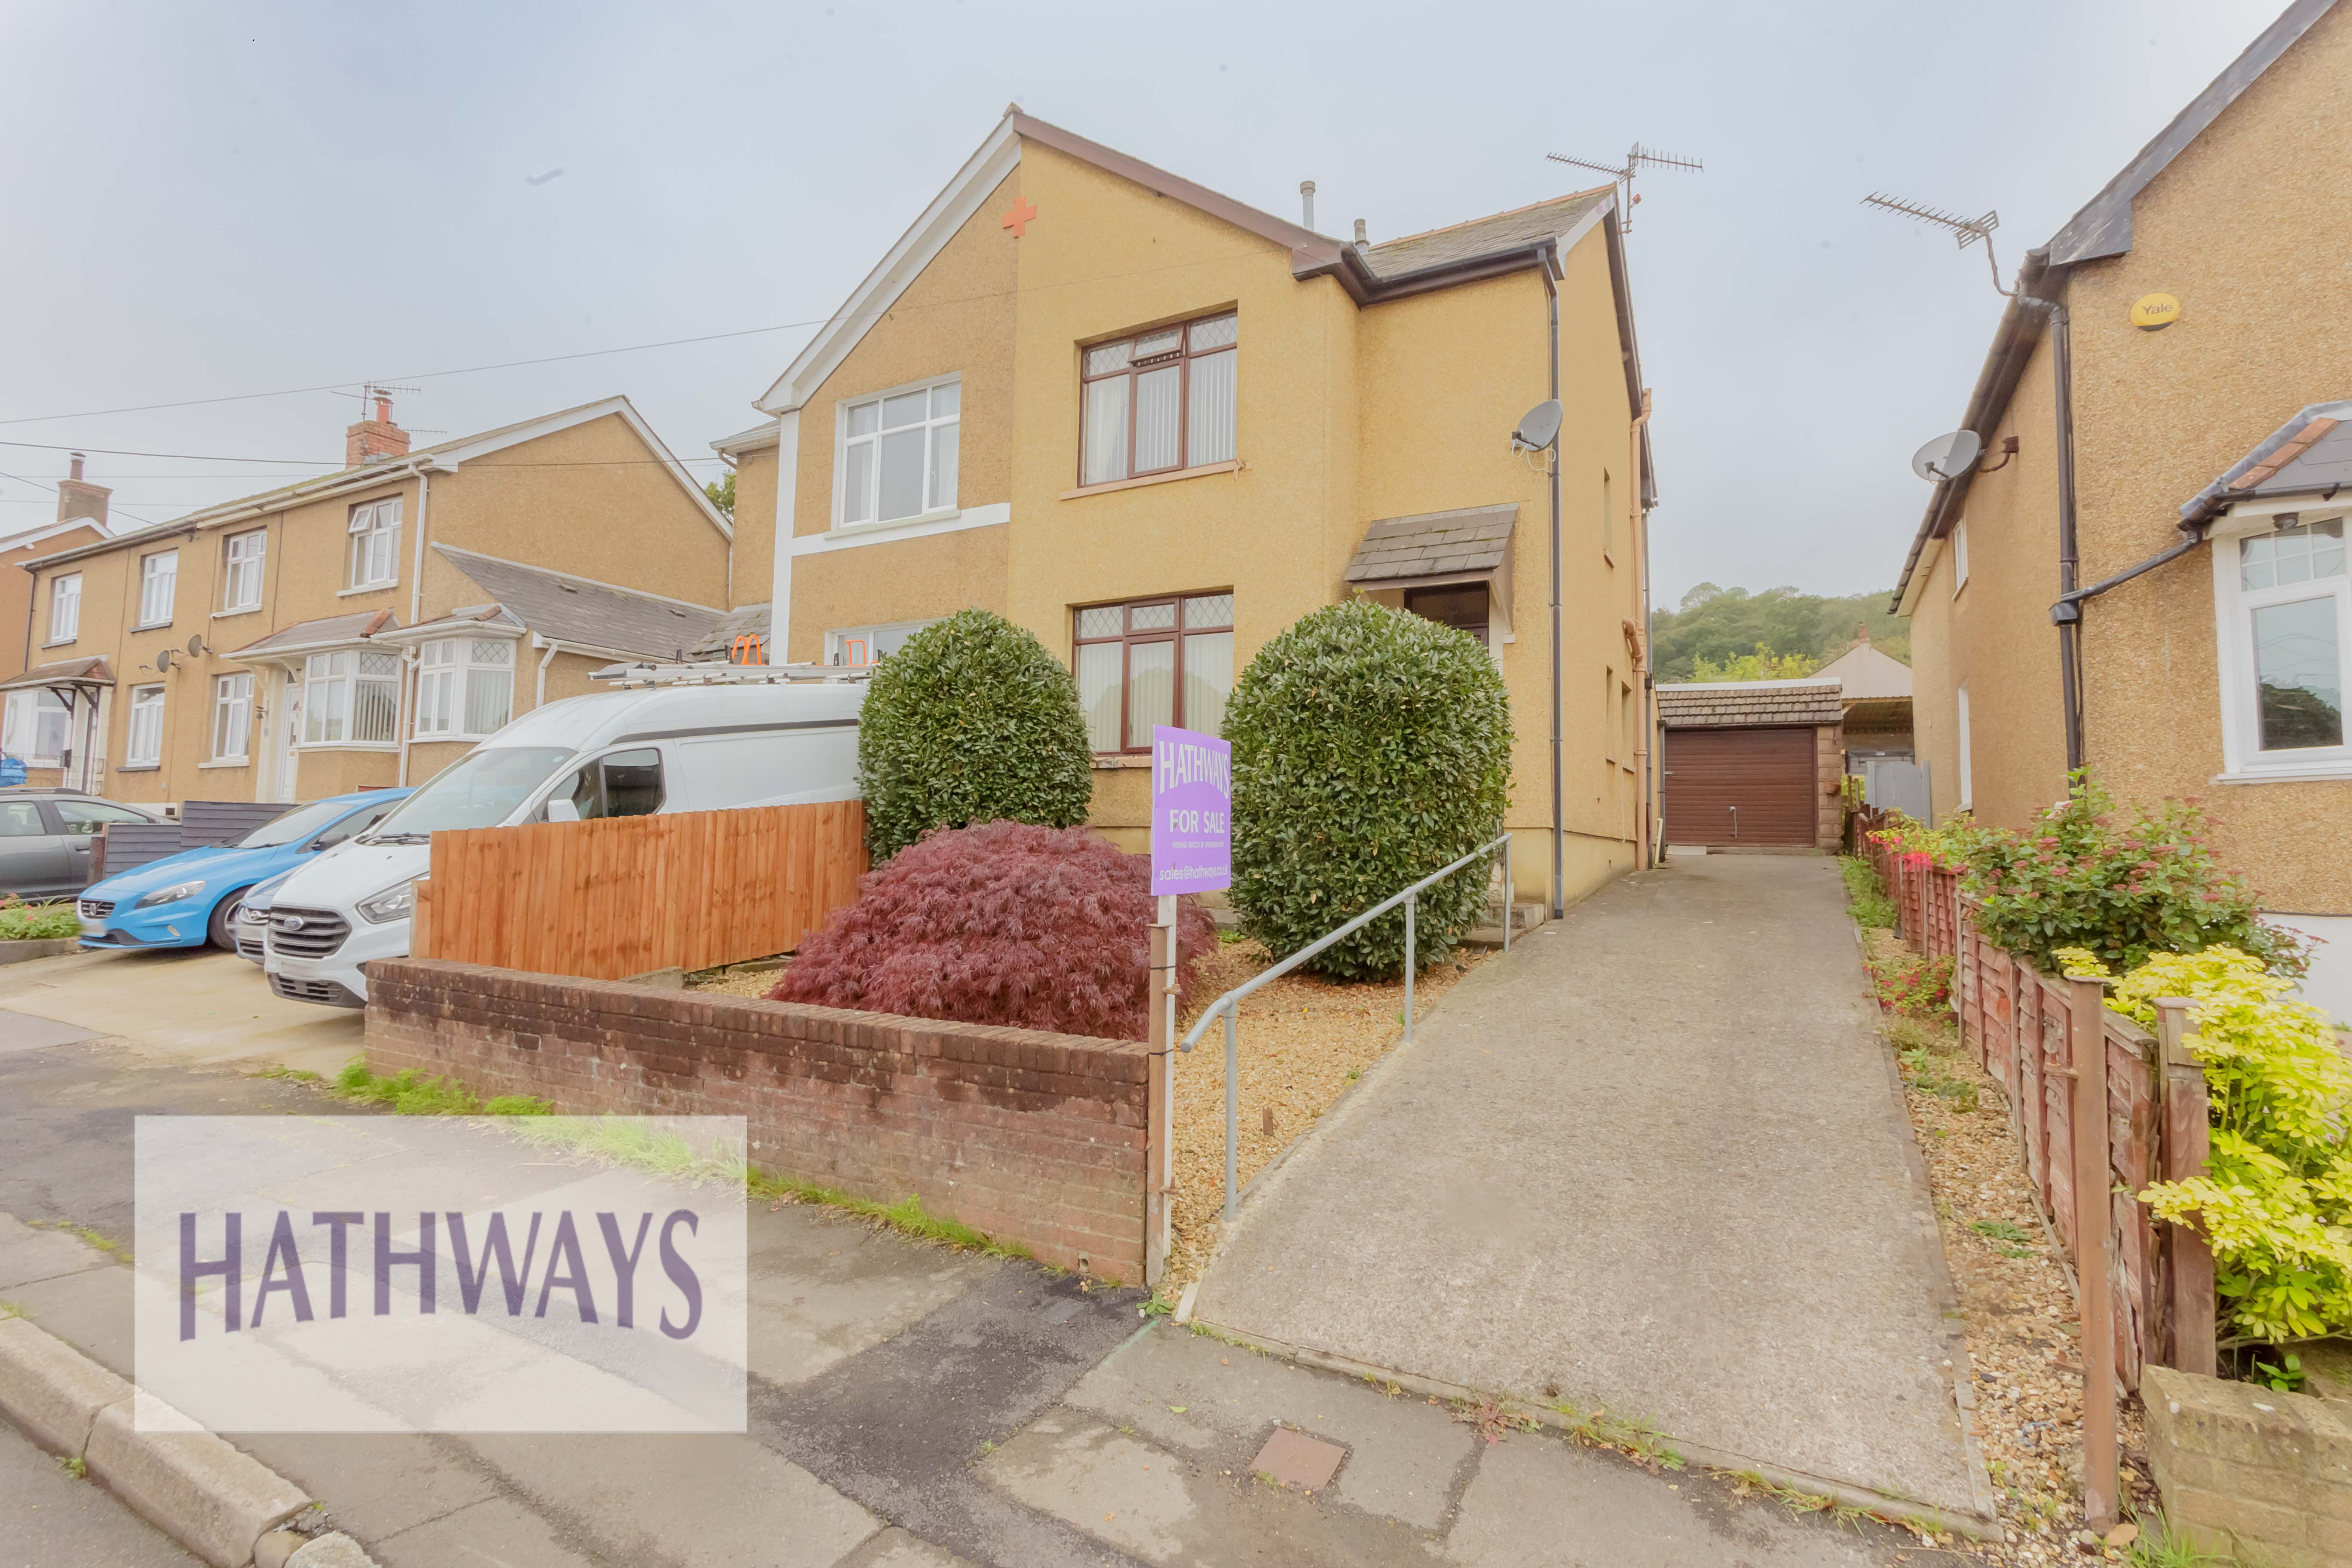 2 bed house for sale in Sycamore Road, Pontypool - Property Image 1